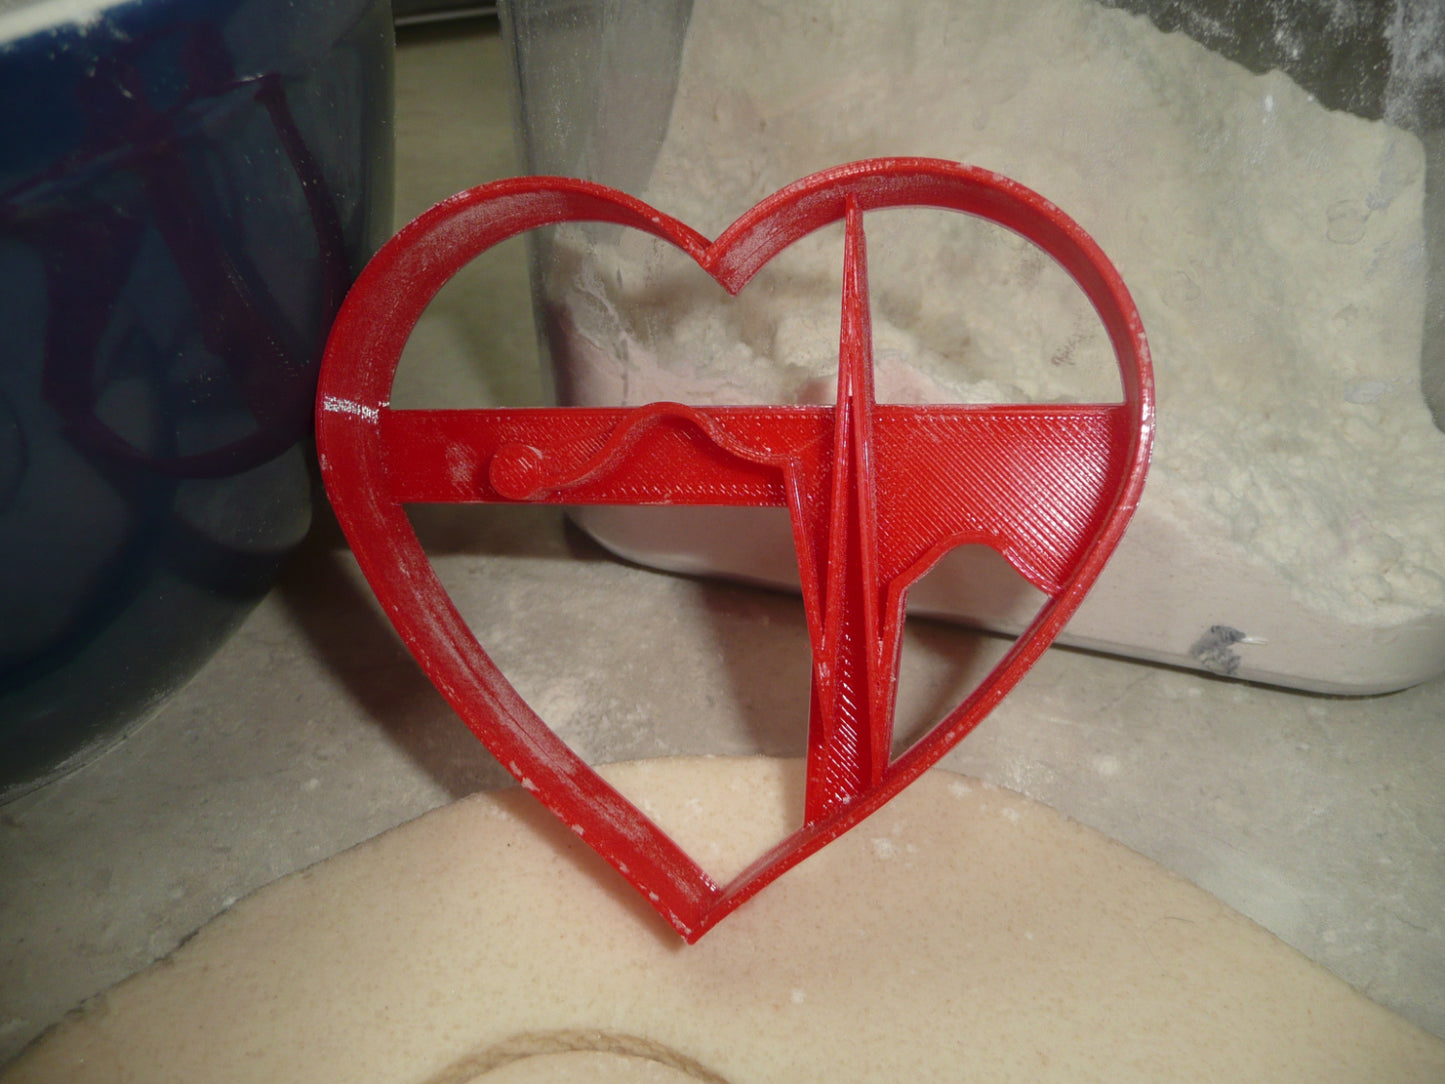 Heart with Heartbeat Detail Love Healthcare Cookie Cutter Made In USA PR4924